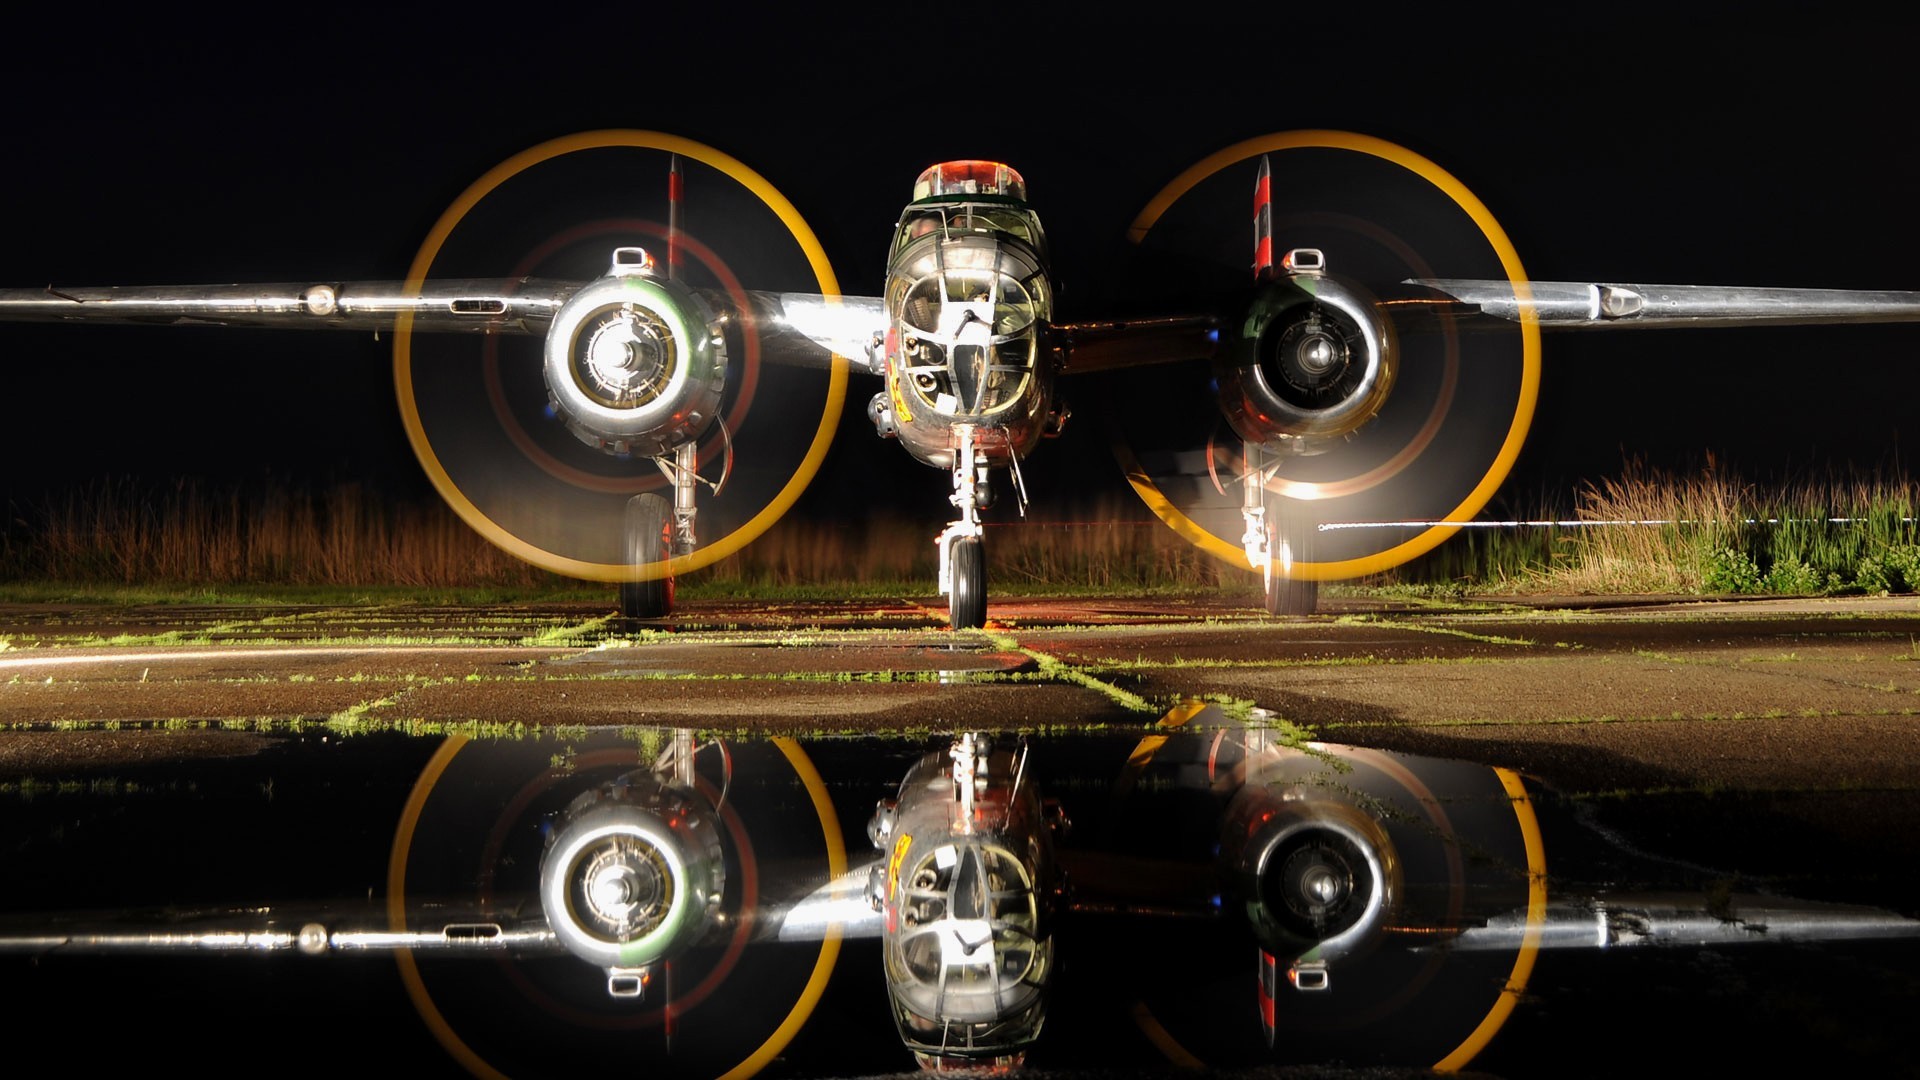 military water reflection wallpaper | | 27455 | WallpaperUP .